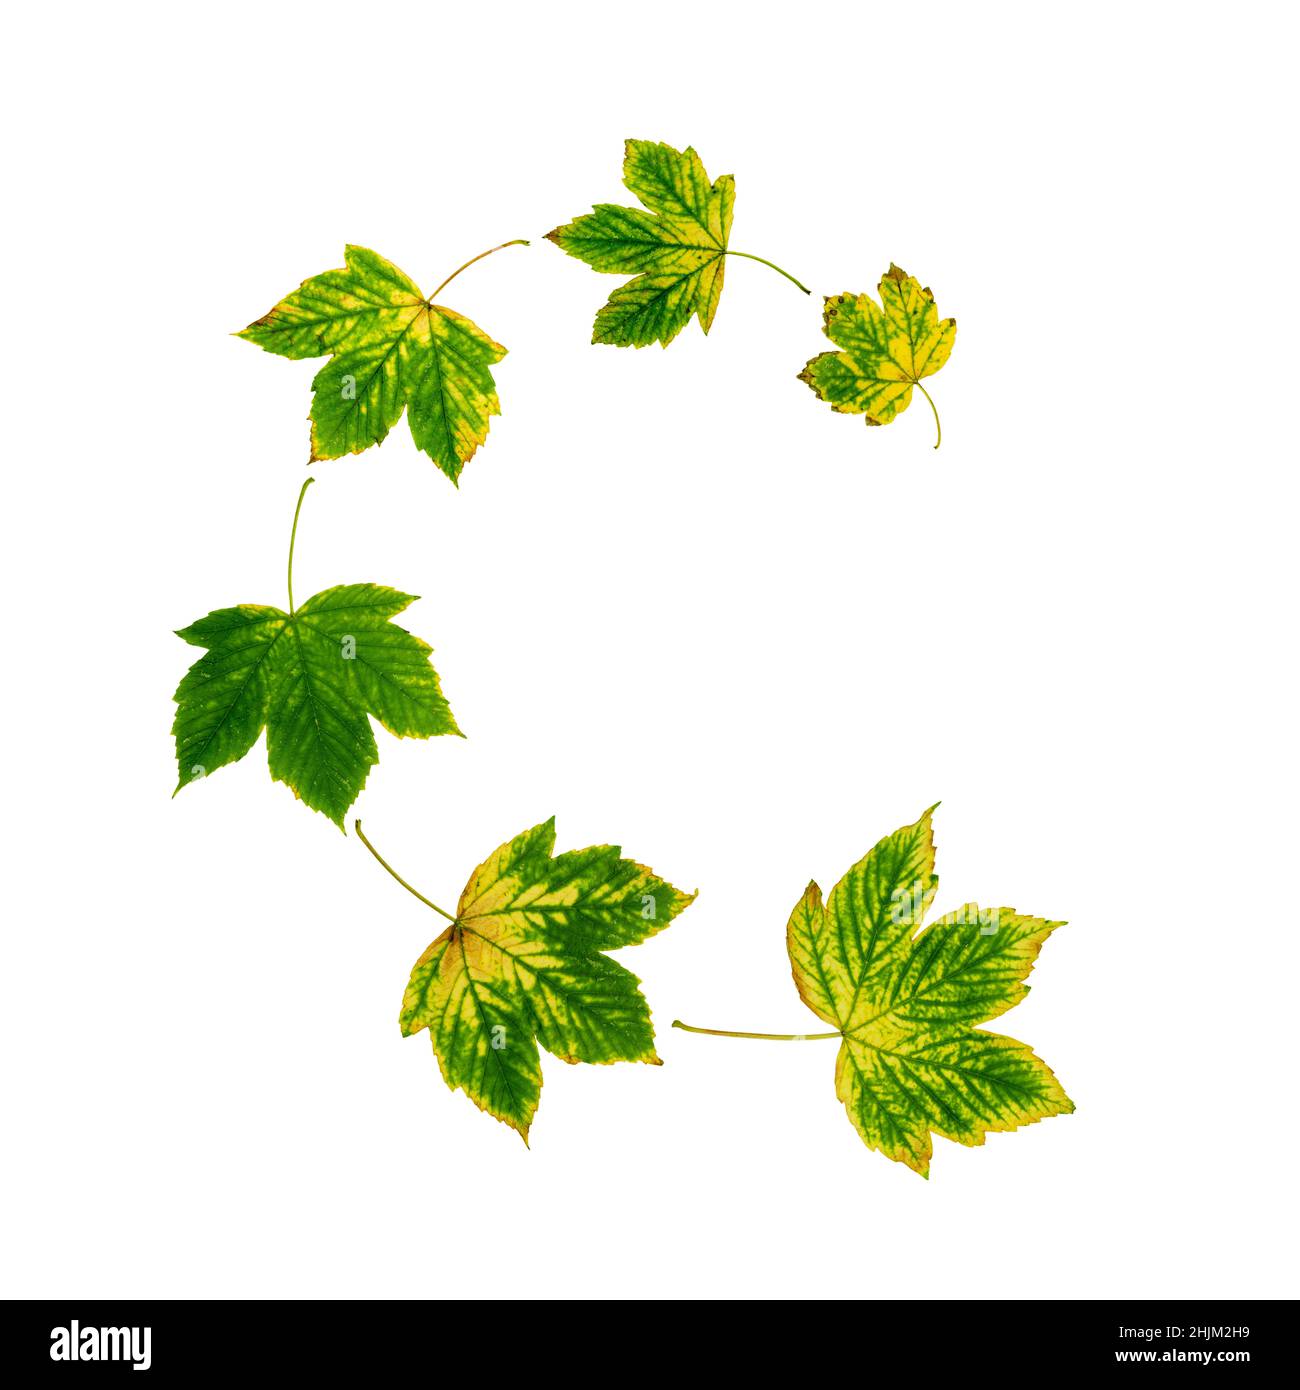 Sycamore maple tree autumn leaves isolated on white. Spiral flying group of six yellow green leaves. Stock Photo